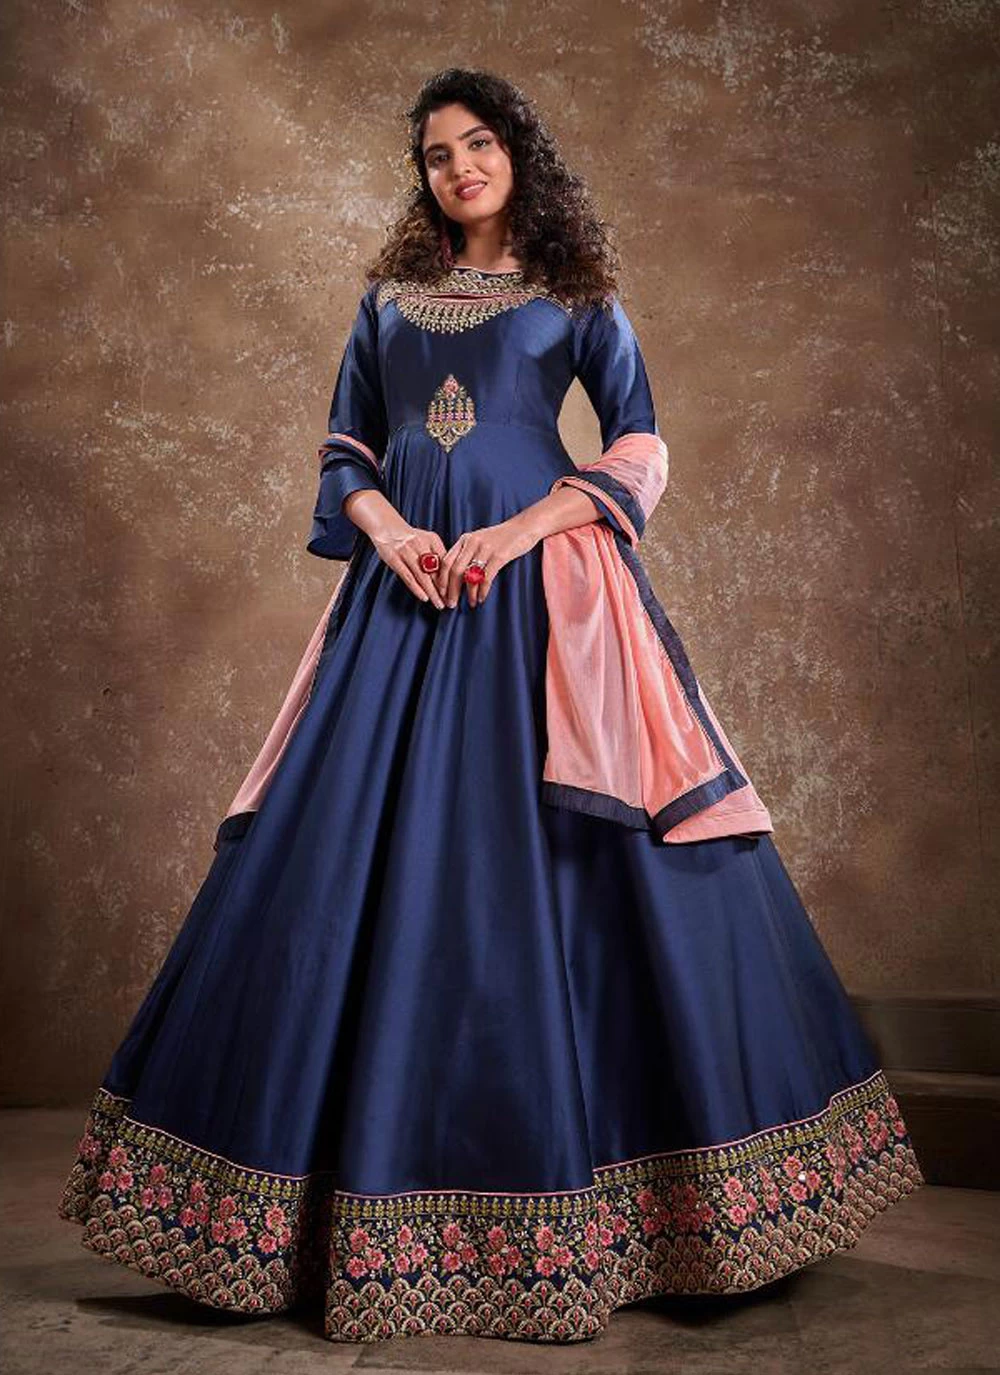 Silk Blue Embroidered Readymade Anarkali Suit